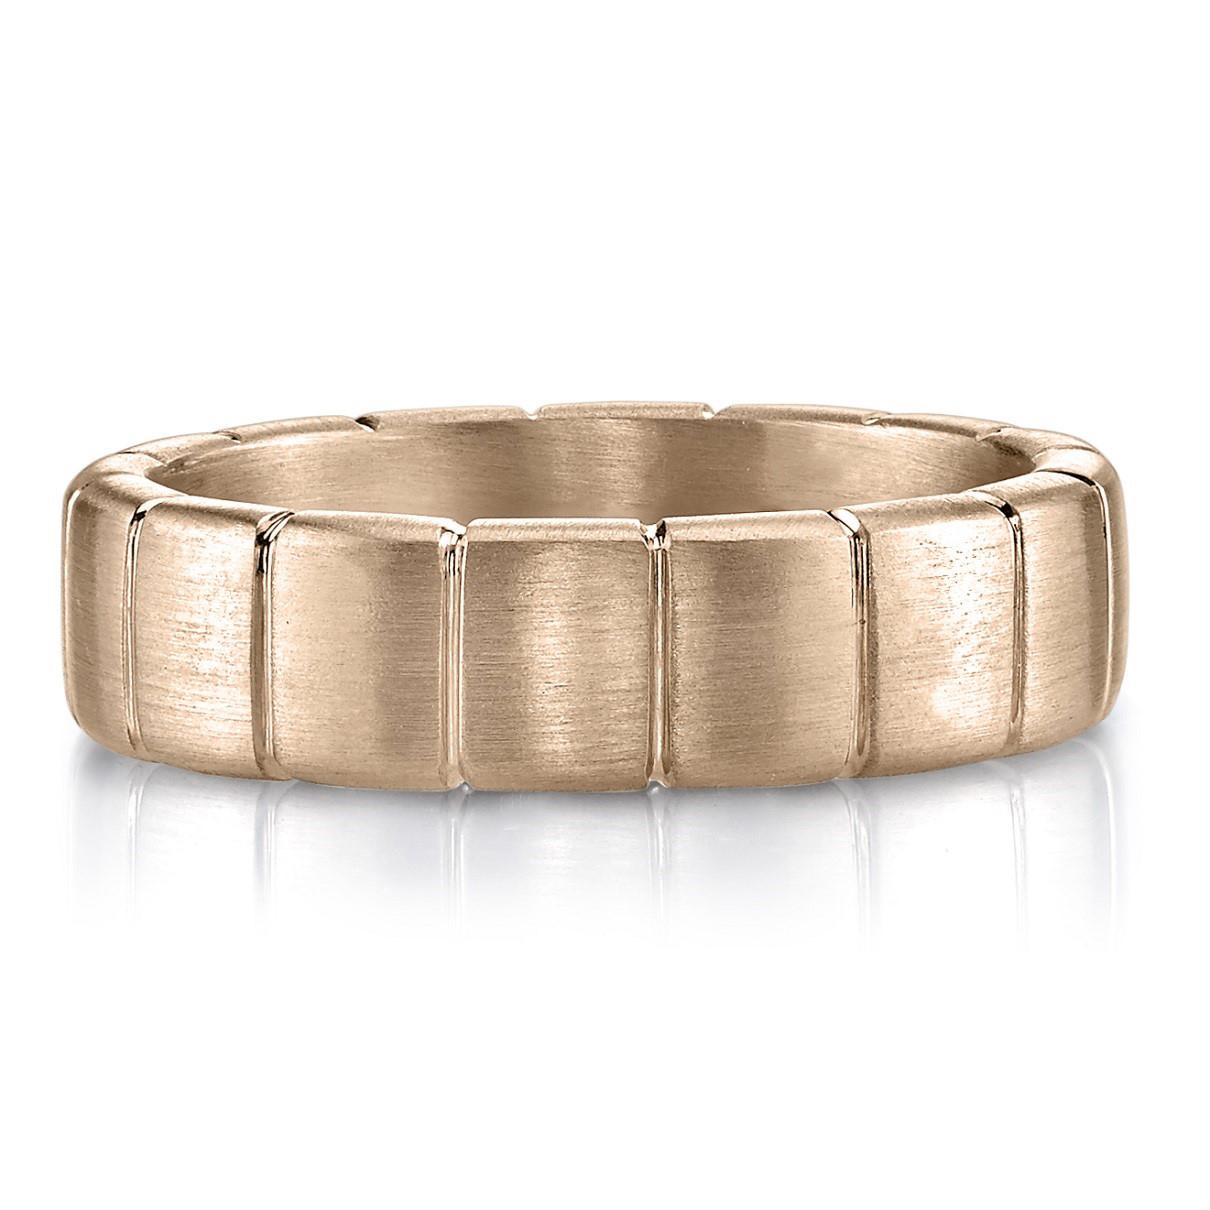 6mm handcrafted 18k gold satin finish sectional Men's band. Bands available in 18K yellow, white and rose gold. Available widths from 2mm to 6mm. 

Our jewelry is made locally in Los Angeles and most pieces are made to order. For these made-to-order